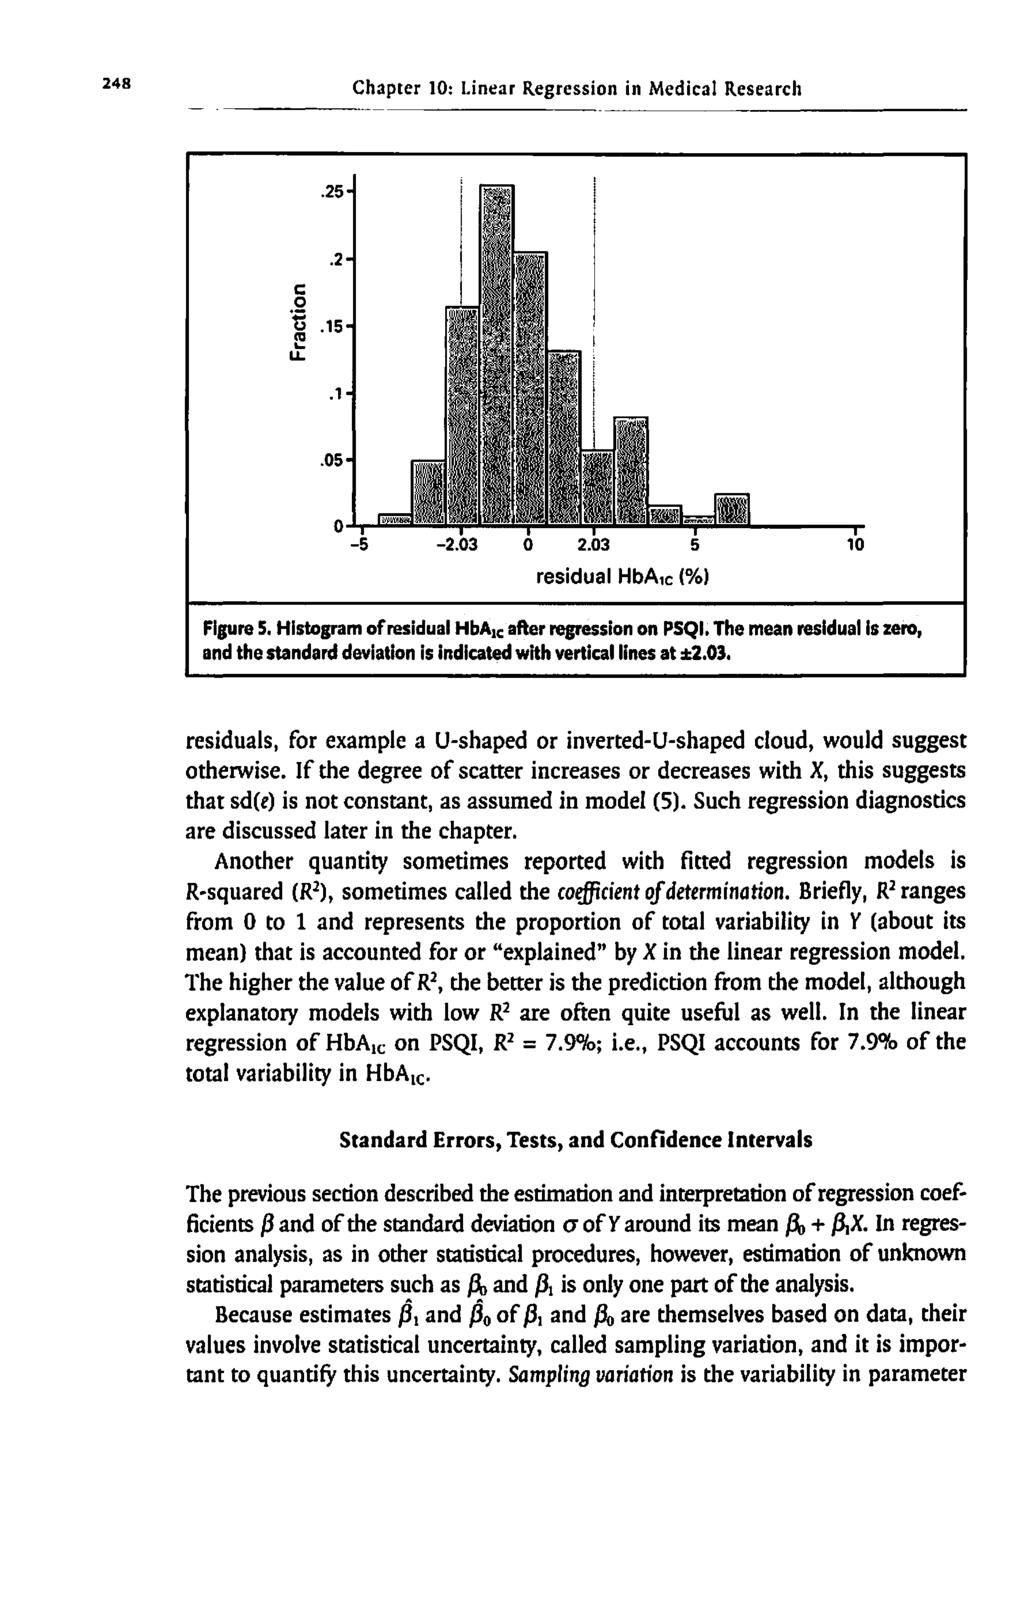 248 C h a p t e r 10: Linear Regression in Medical Research 2.03 0 2.03 5 residual HI3 P i o/ Figure 5. Histogram of residual HbA and the standard deviation is indicated with vertical lines at *2.03. residuals, for example a U-shaped or inverted-u-shaped cloud, would suggest otherwise.